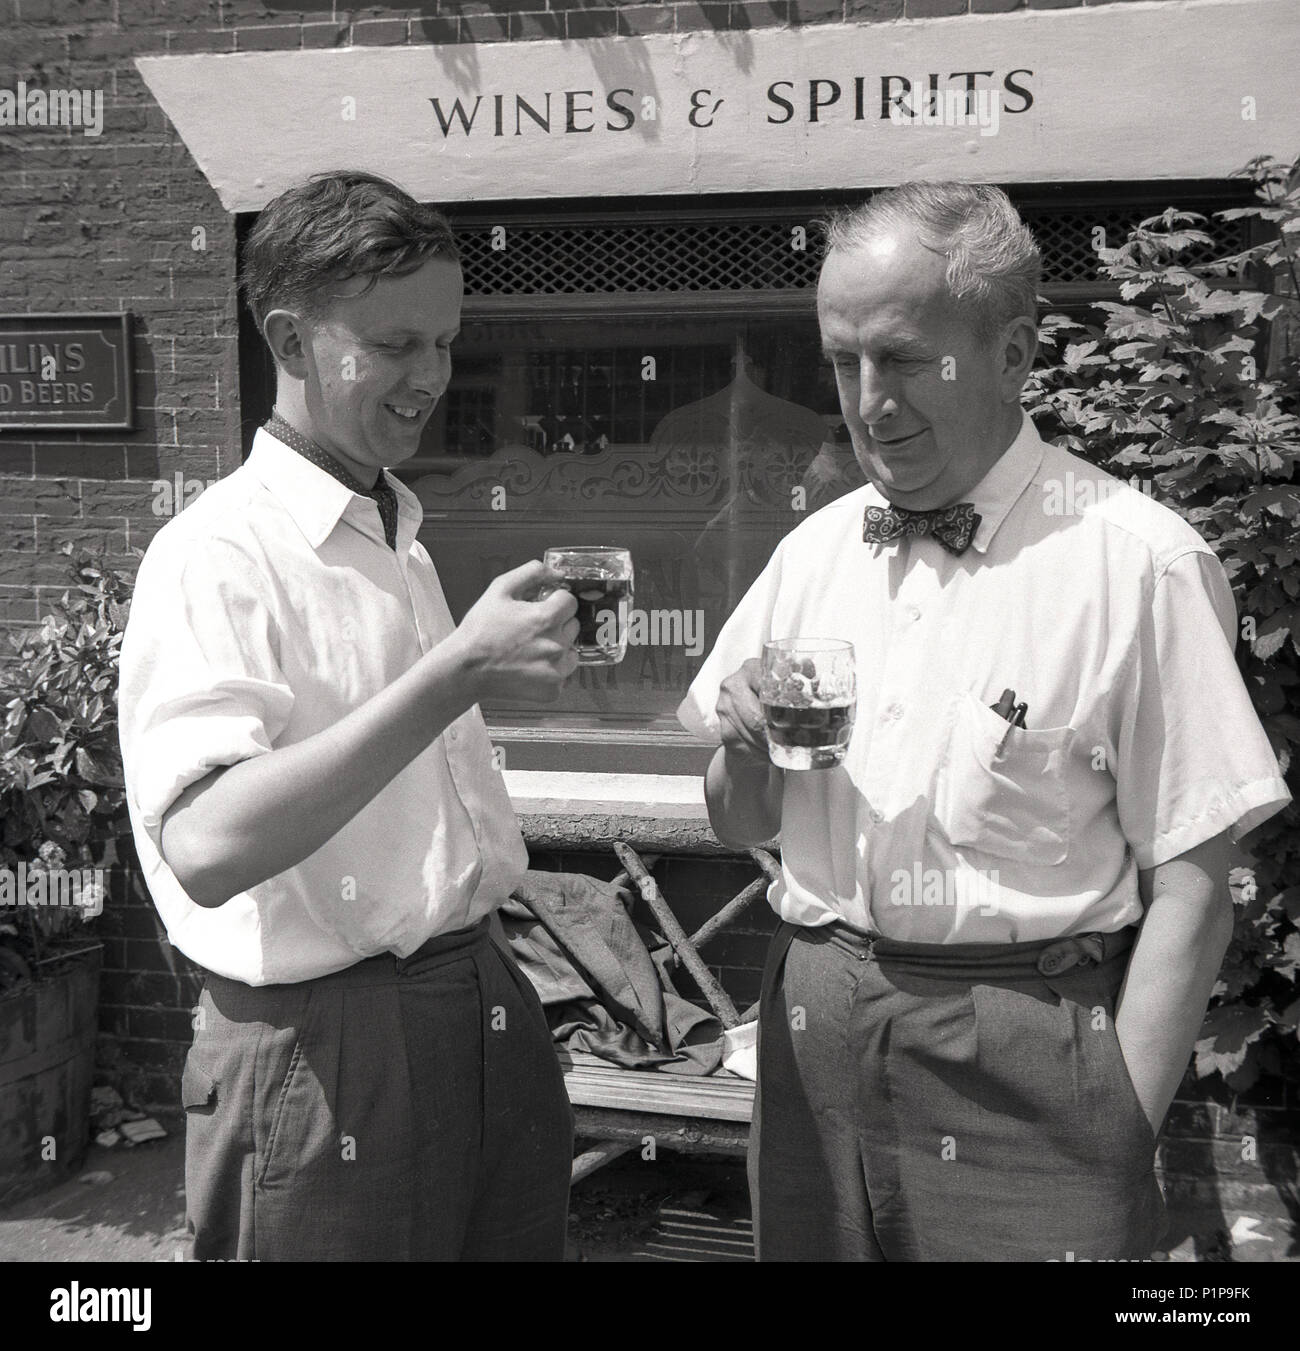 1955, cheers! historical picture, two gentlemen, the younger one wearing a cravat, the older one, a bow tie, stand outside a pub having a drink together, a tankard of Fremlin's beer or ale, Whitstable, Kent, England, UK. Stock Photo